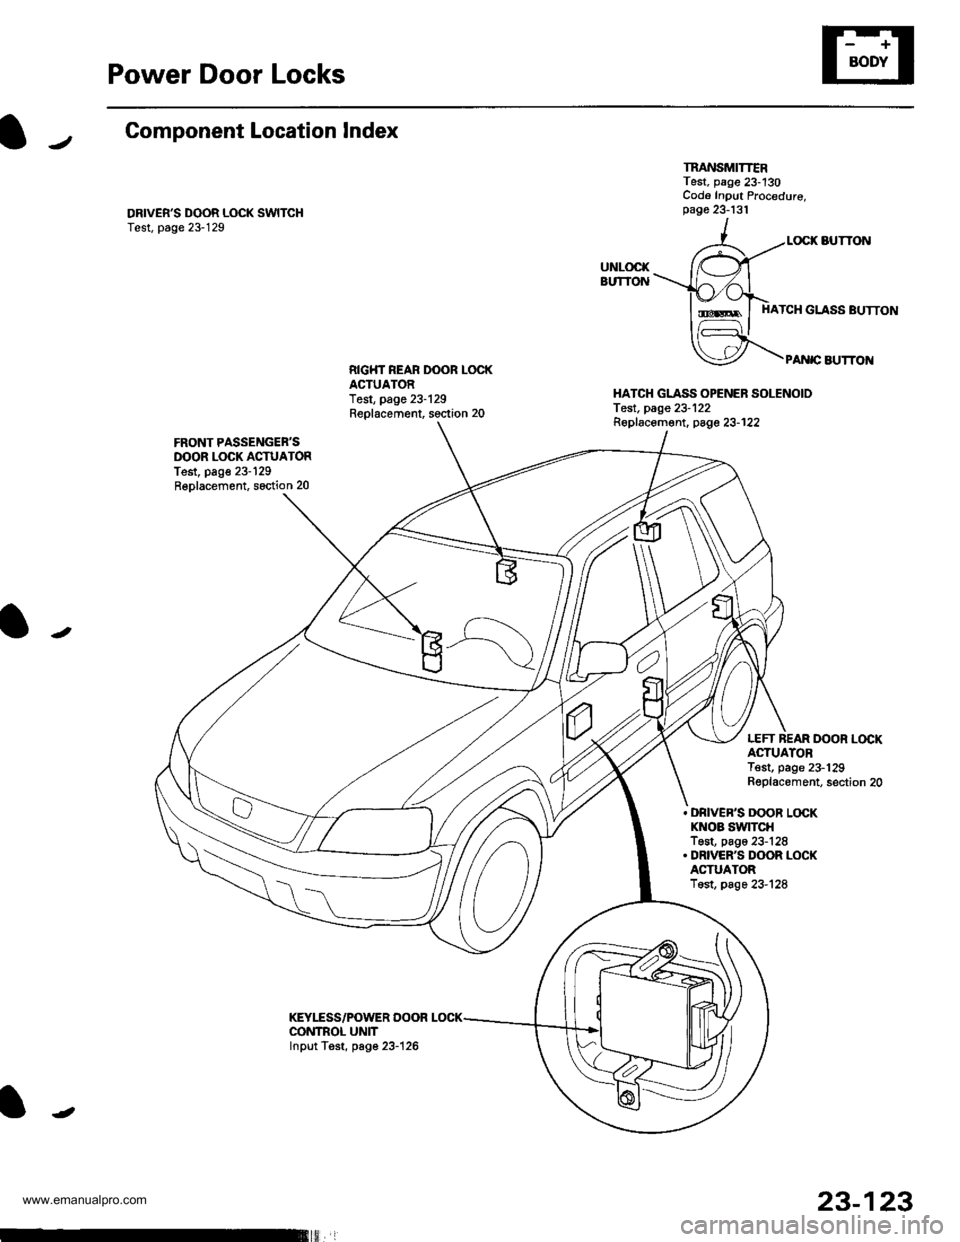 HONDA CR-V 1997 RD1-RD3 / 1.G Workshop Manual 
Power Door Locks
Component Location lndex
DRIVERS DOOR L(rcK SWITCHTest, page 23-129
TRANSMITTERTest, page 23-130Cod6 Input Procedure,page 23-131
LOCK BUTTON
HATCH GLASS BUTTON
PA rc AUTTO]IIRIGT{T 